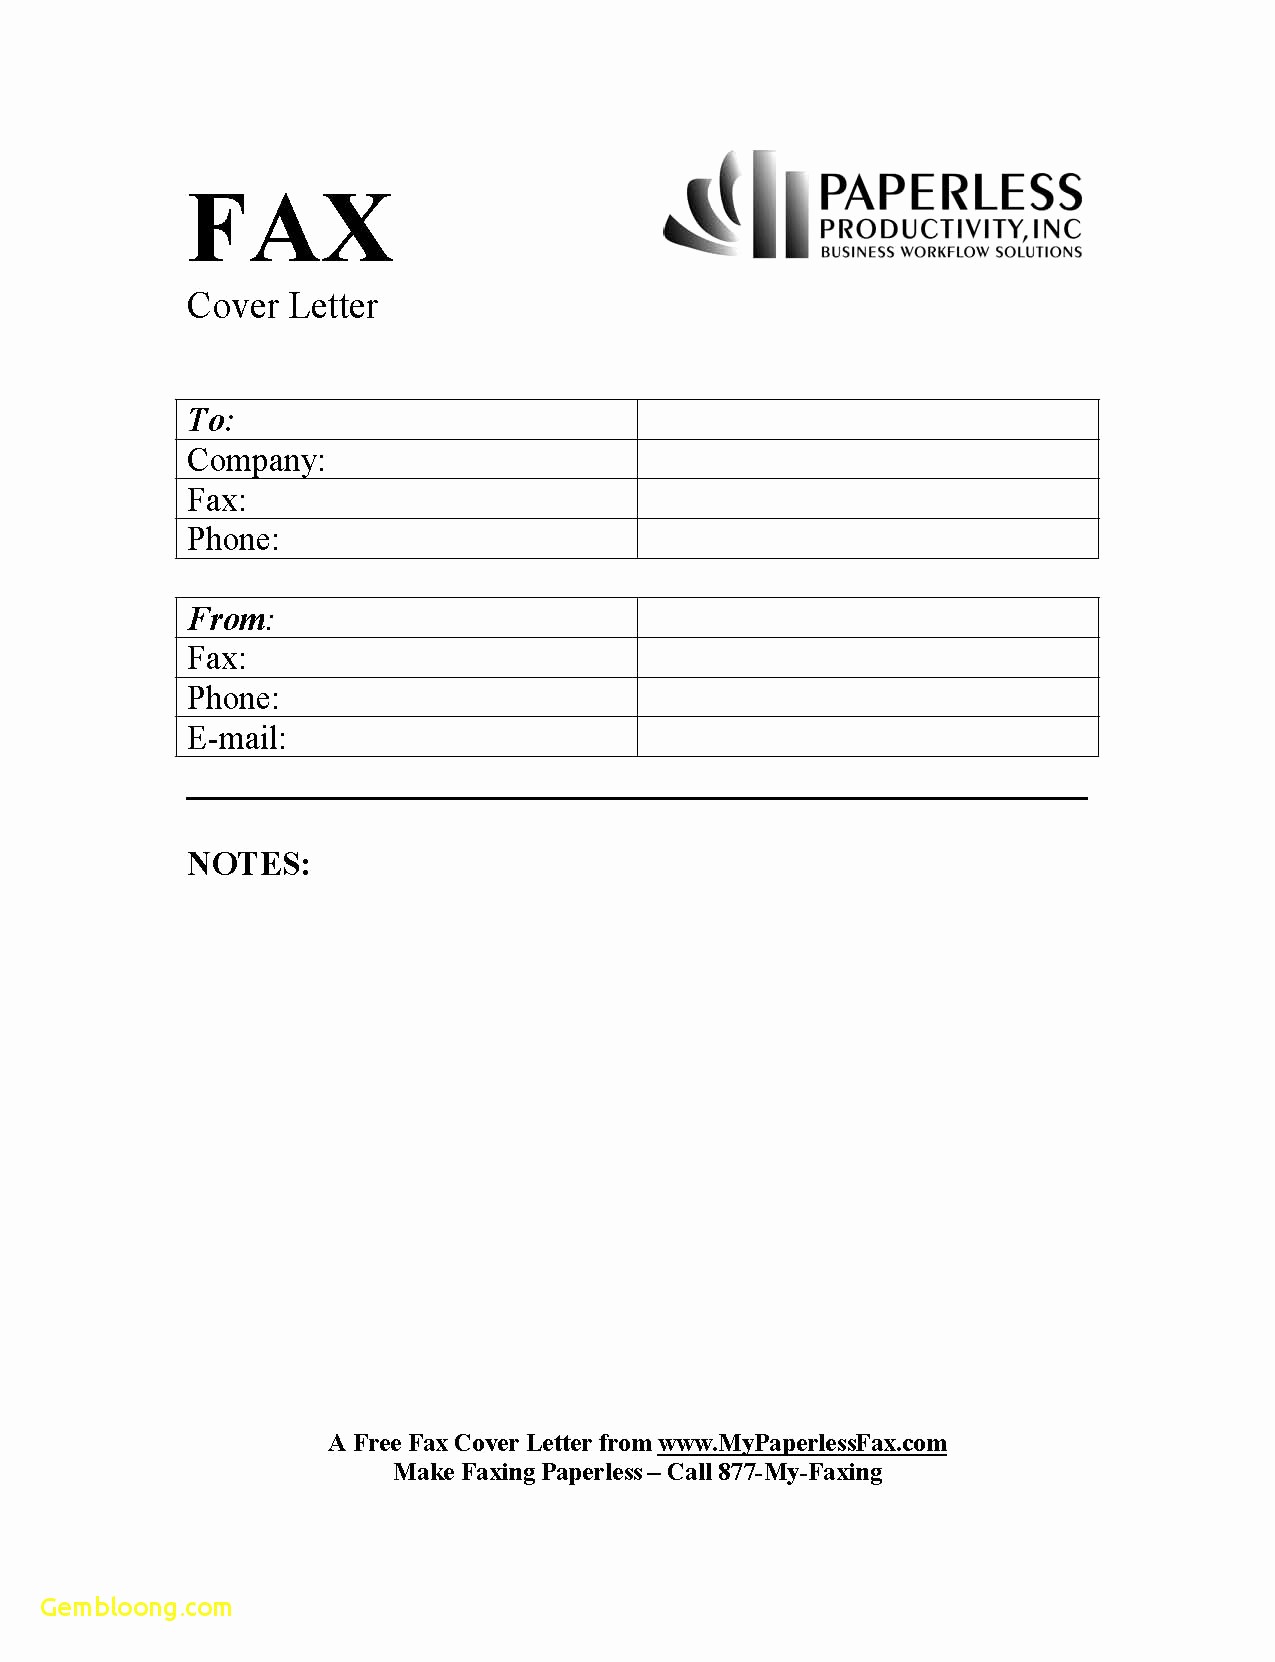 Word Template Fax Cover Sheet New Fax Cover Letter Template Word Collection